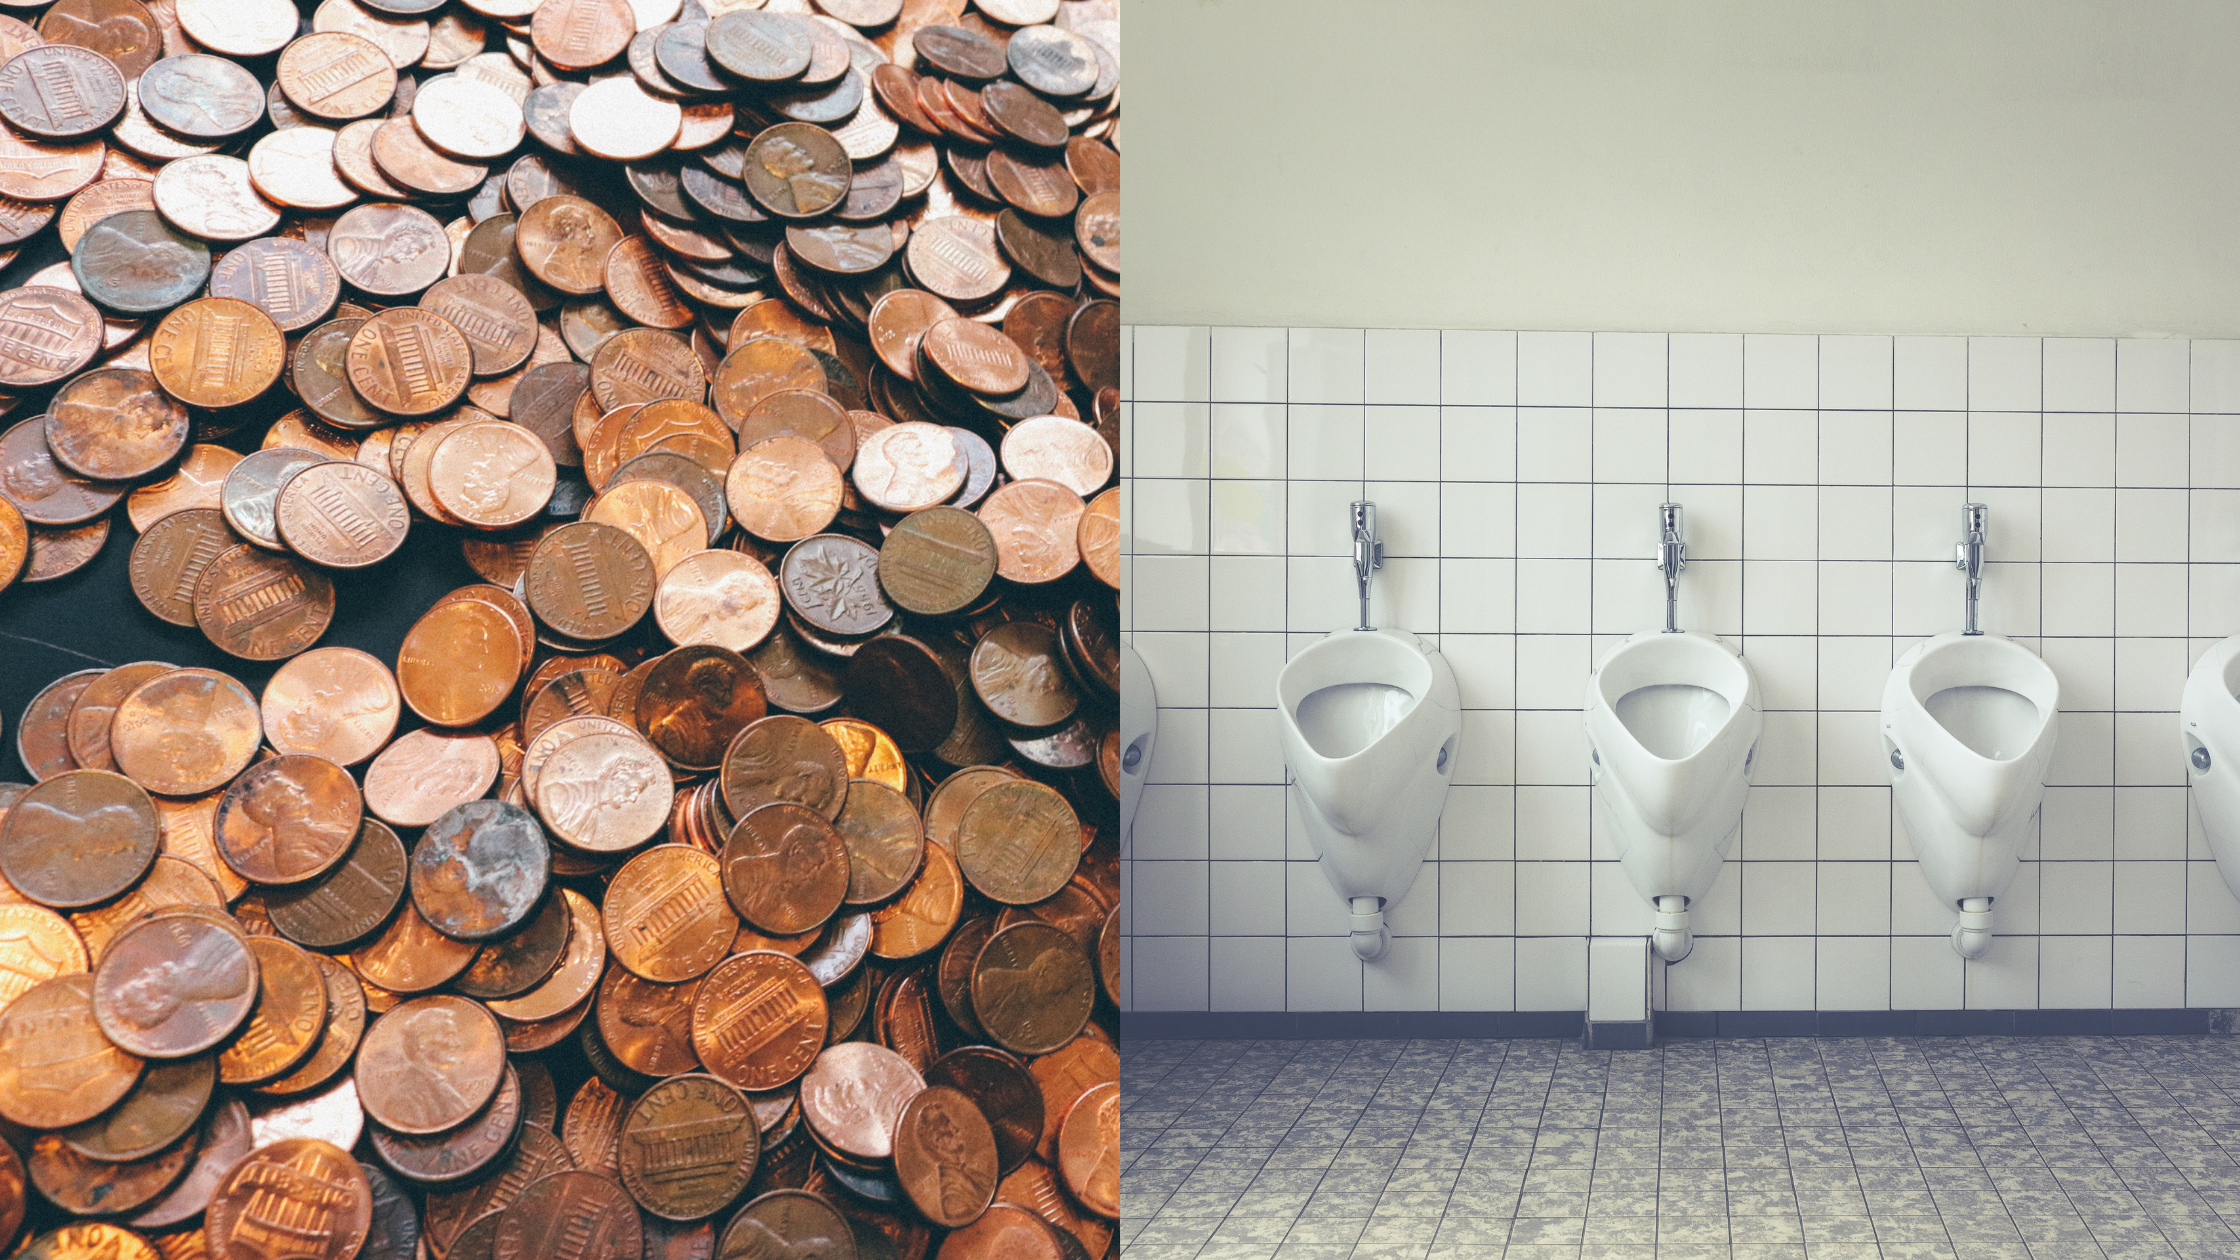 spend-a-penny-urinal-toilet